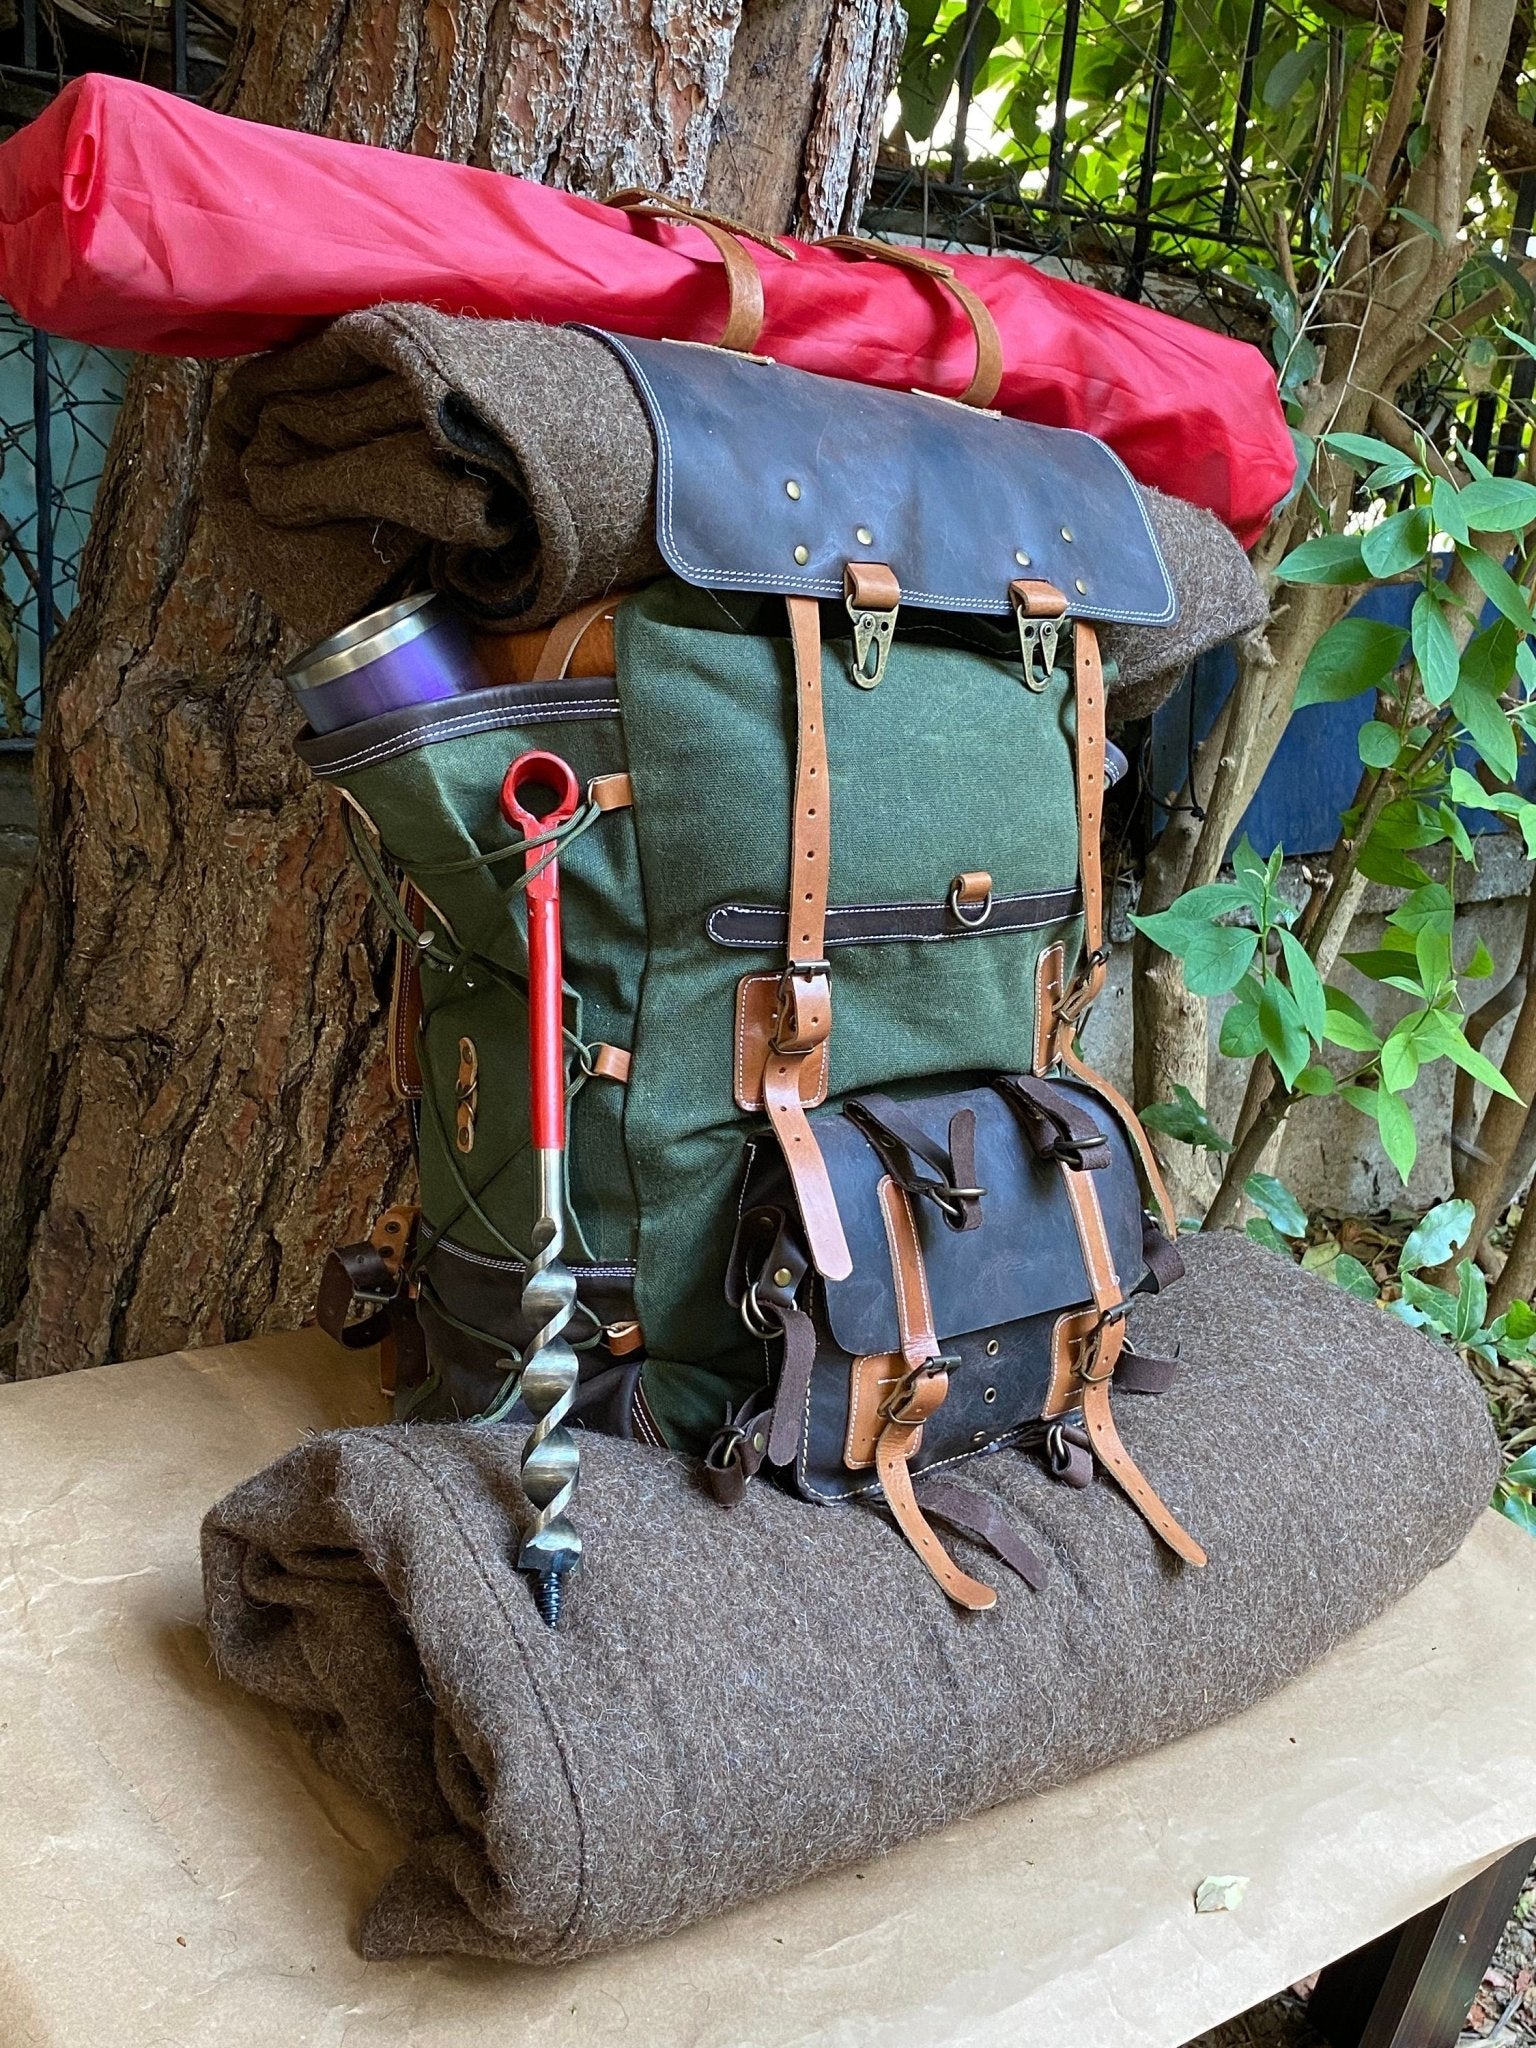 Bestseller 300 USD Discount | Ready for Bushcraft, Survival, Outdoor | Handmade Leather and Waxed Backpack  | Travel Bag, Bushcraft Bag bushcraft - camping - hiking backpack 99percenthandmade   